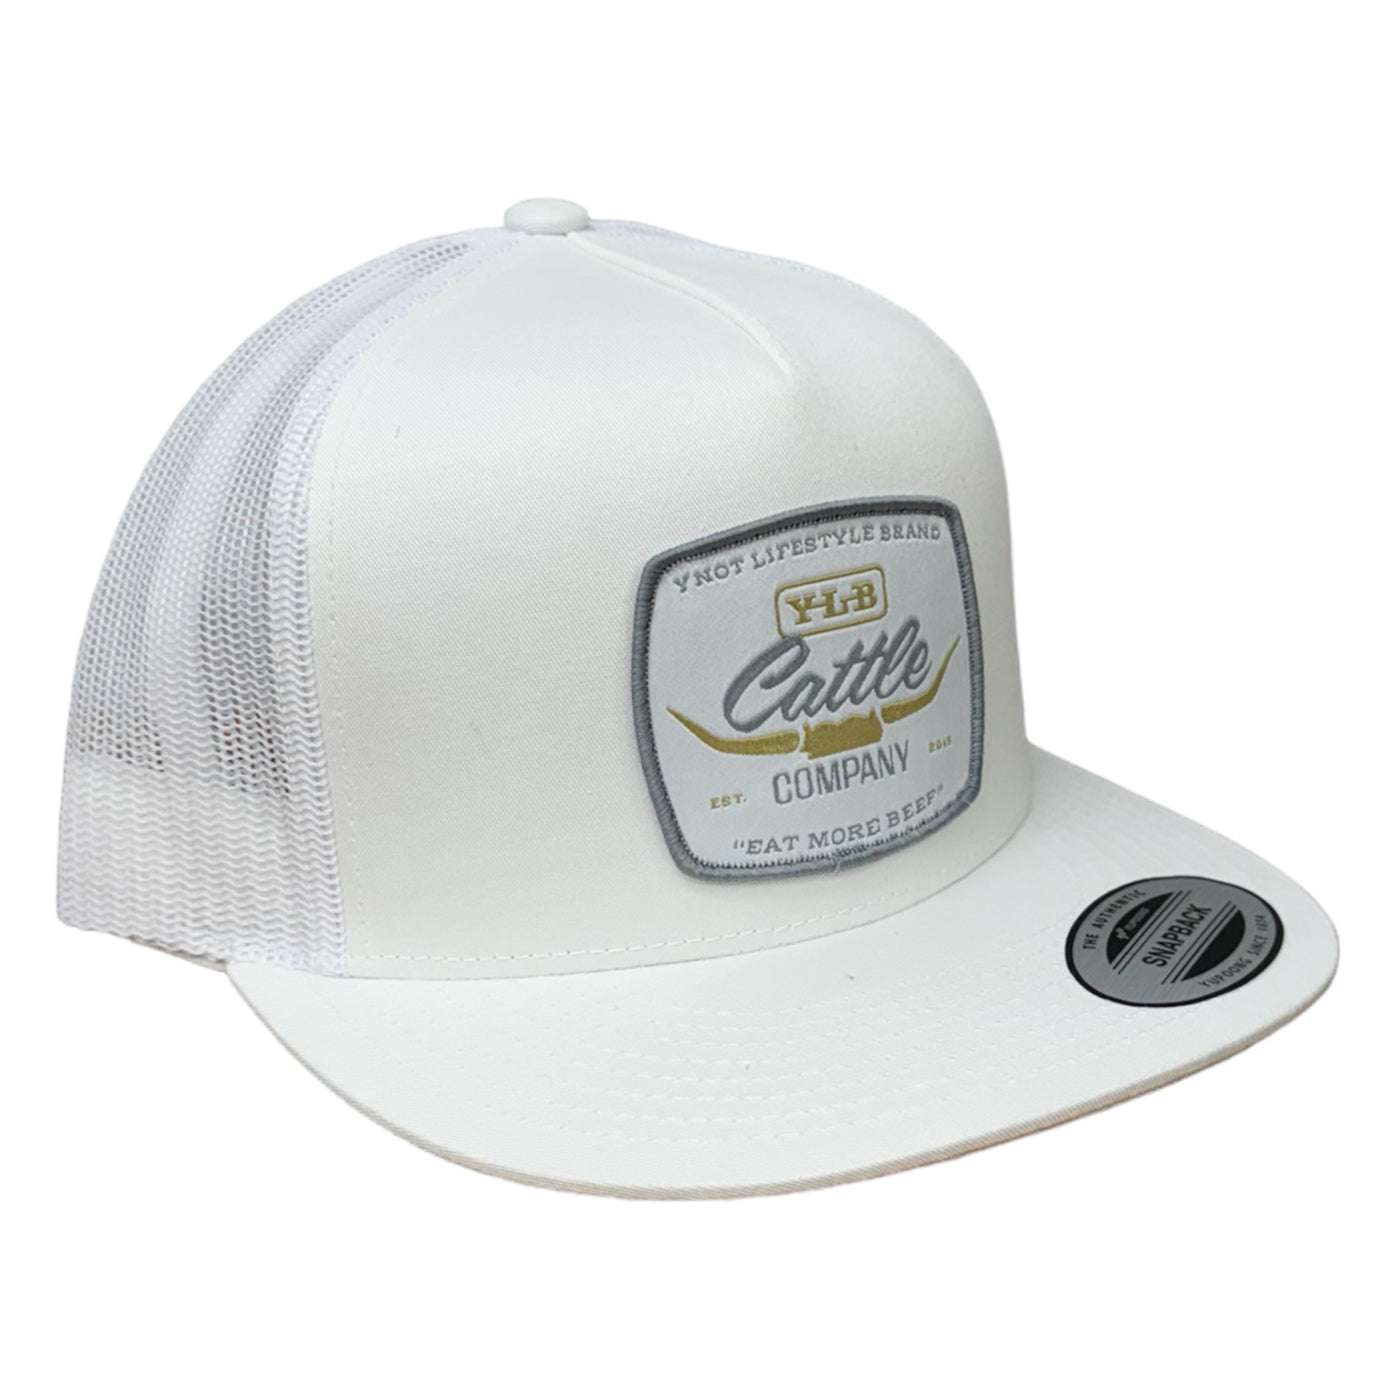 YNOT Lifestyle Brand Hat and Apparel - Quality Farmer & Rancher Hats - White Brisket Patch